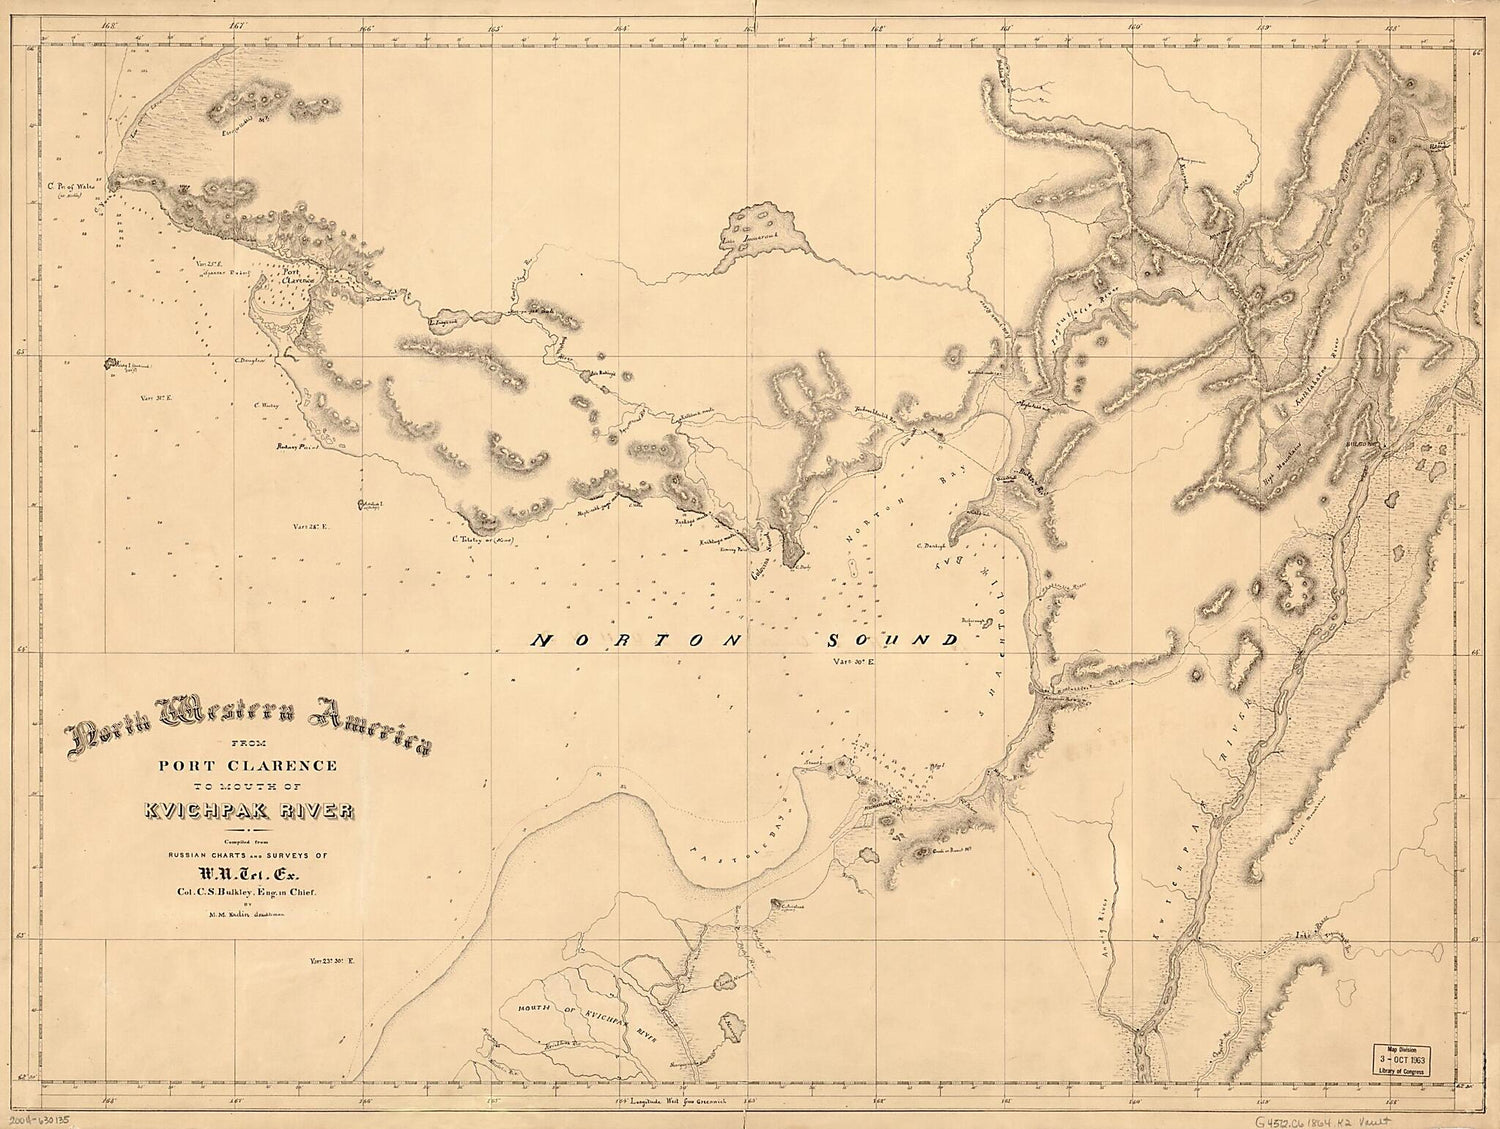 This old map of North Western America, from Port Clarence to Mouth of Kvichpak sic River (Northwestern America, from Port Clarence to Mouth of Kvichpak sic River) from 1864 was created by M. M. Kadin,  Western Union Telegraph Expedition in 1864